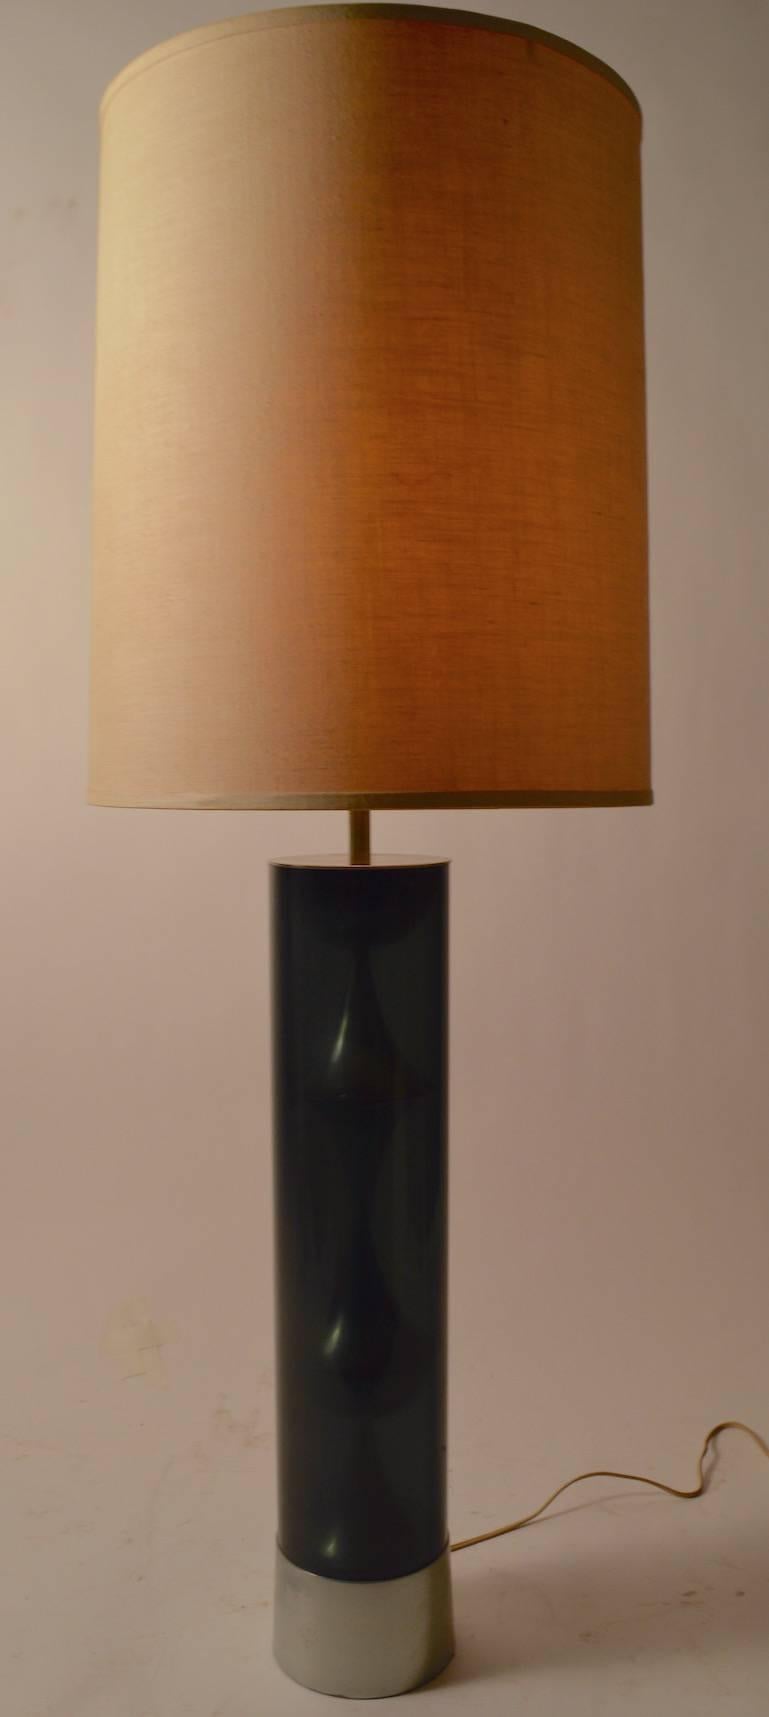 This table lamp features a dark smoked Lucite tube which houses a decorative chrome element. The lamp included the original shade, which shows minor wear. Working, original and clean condition, 23